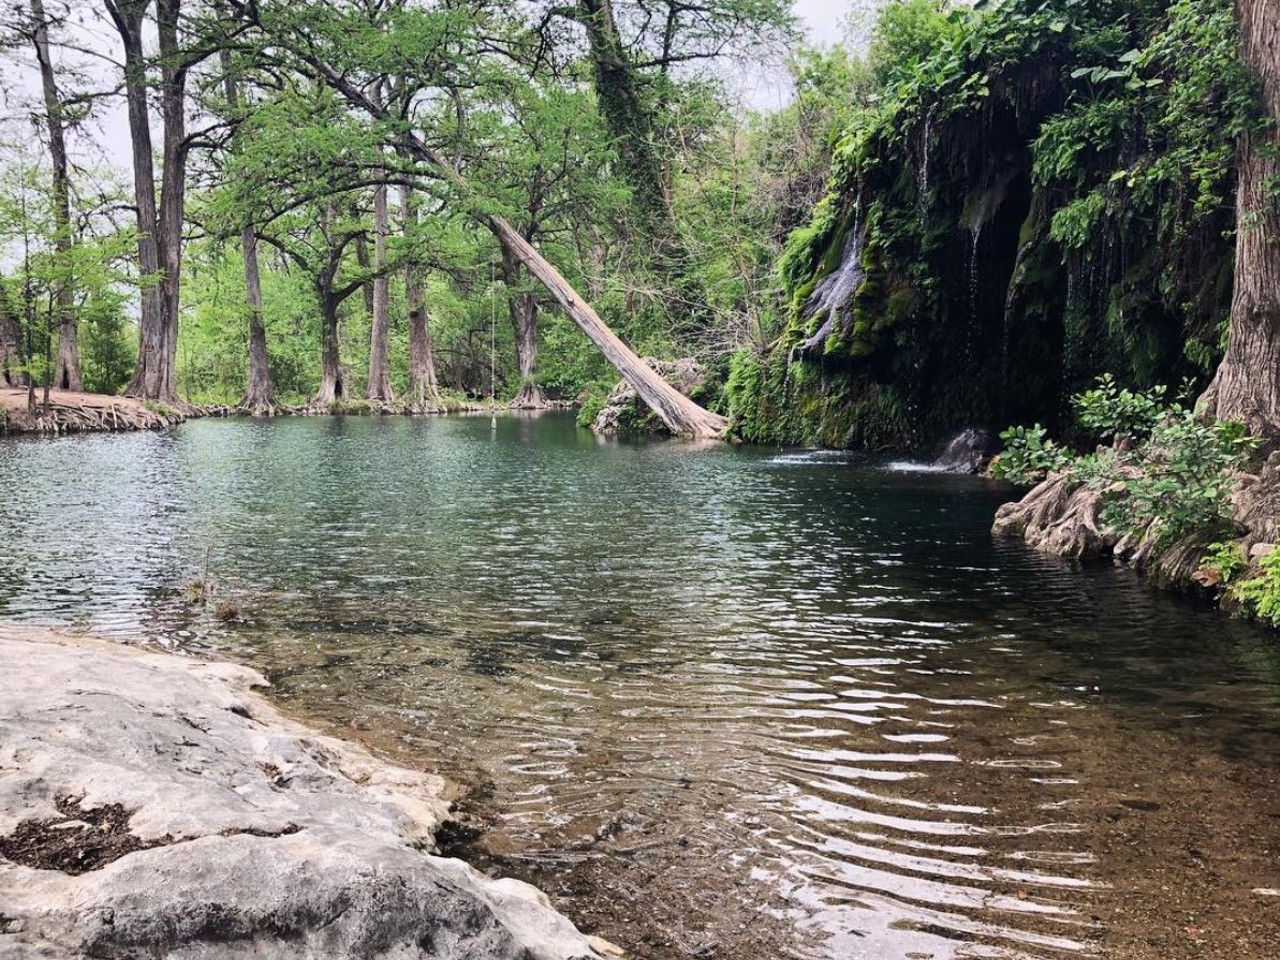 Krause Springs
404 Krause Spring Rd, (830) 693-4181, krausesprings.net
Located a little north of Austin, Krause Springs is a beautiful spot for enjoying the outdoors. And taking pictures, of course. If you plan to come or camp, be sure to bring cash for admission.
Photo via Instagram / heidimsimmons